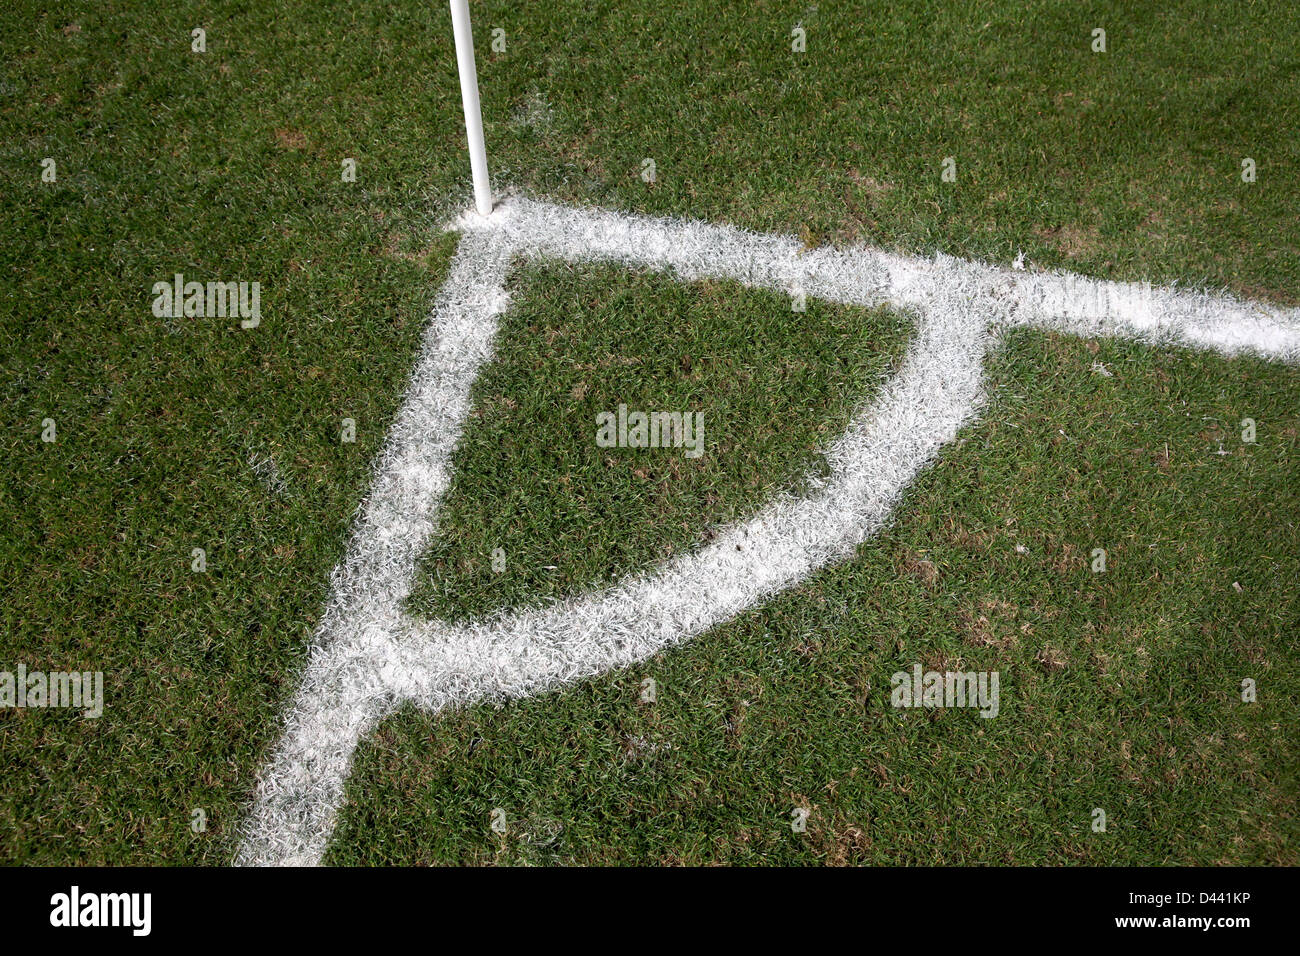 White line on a soccer field grass Stock Photo